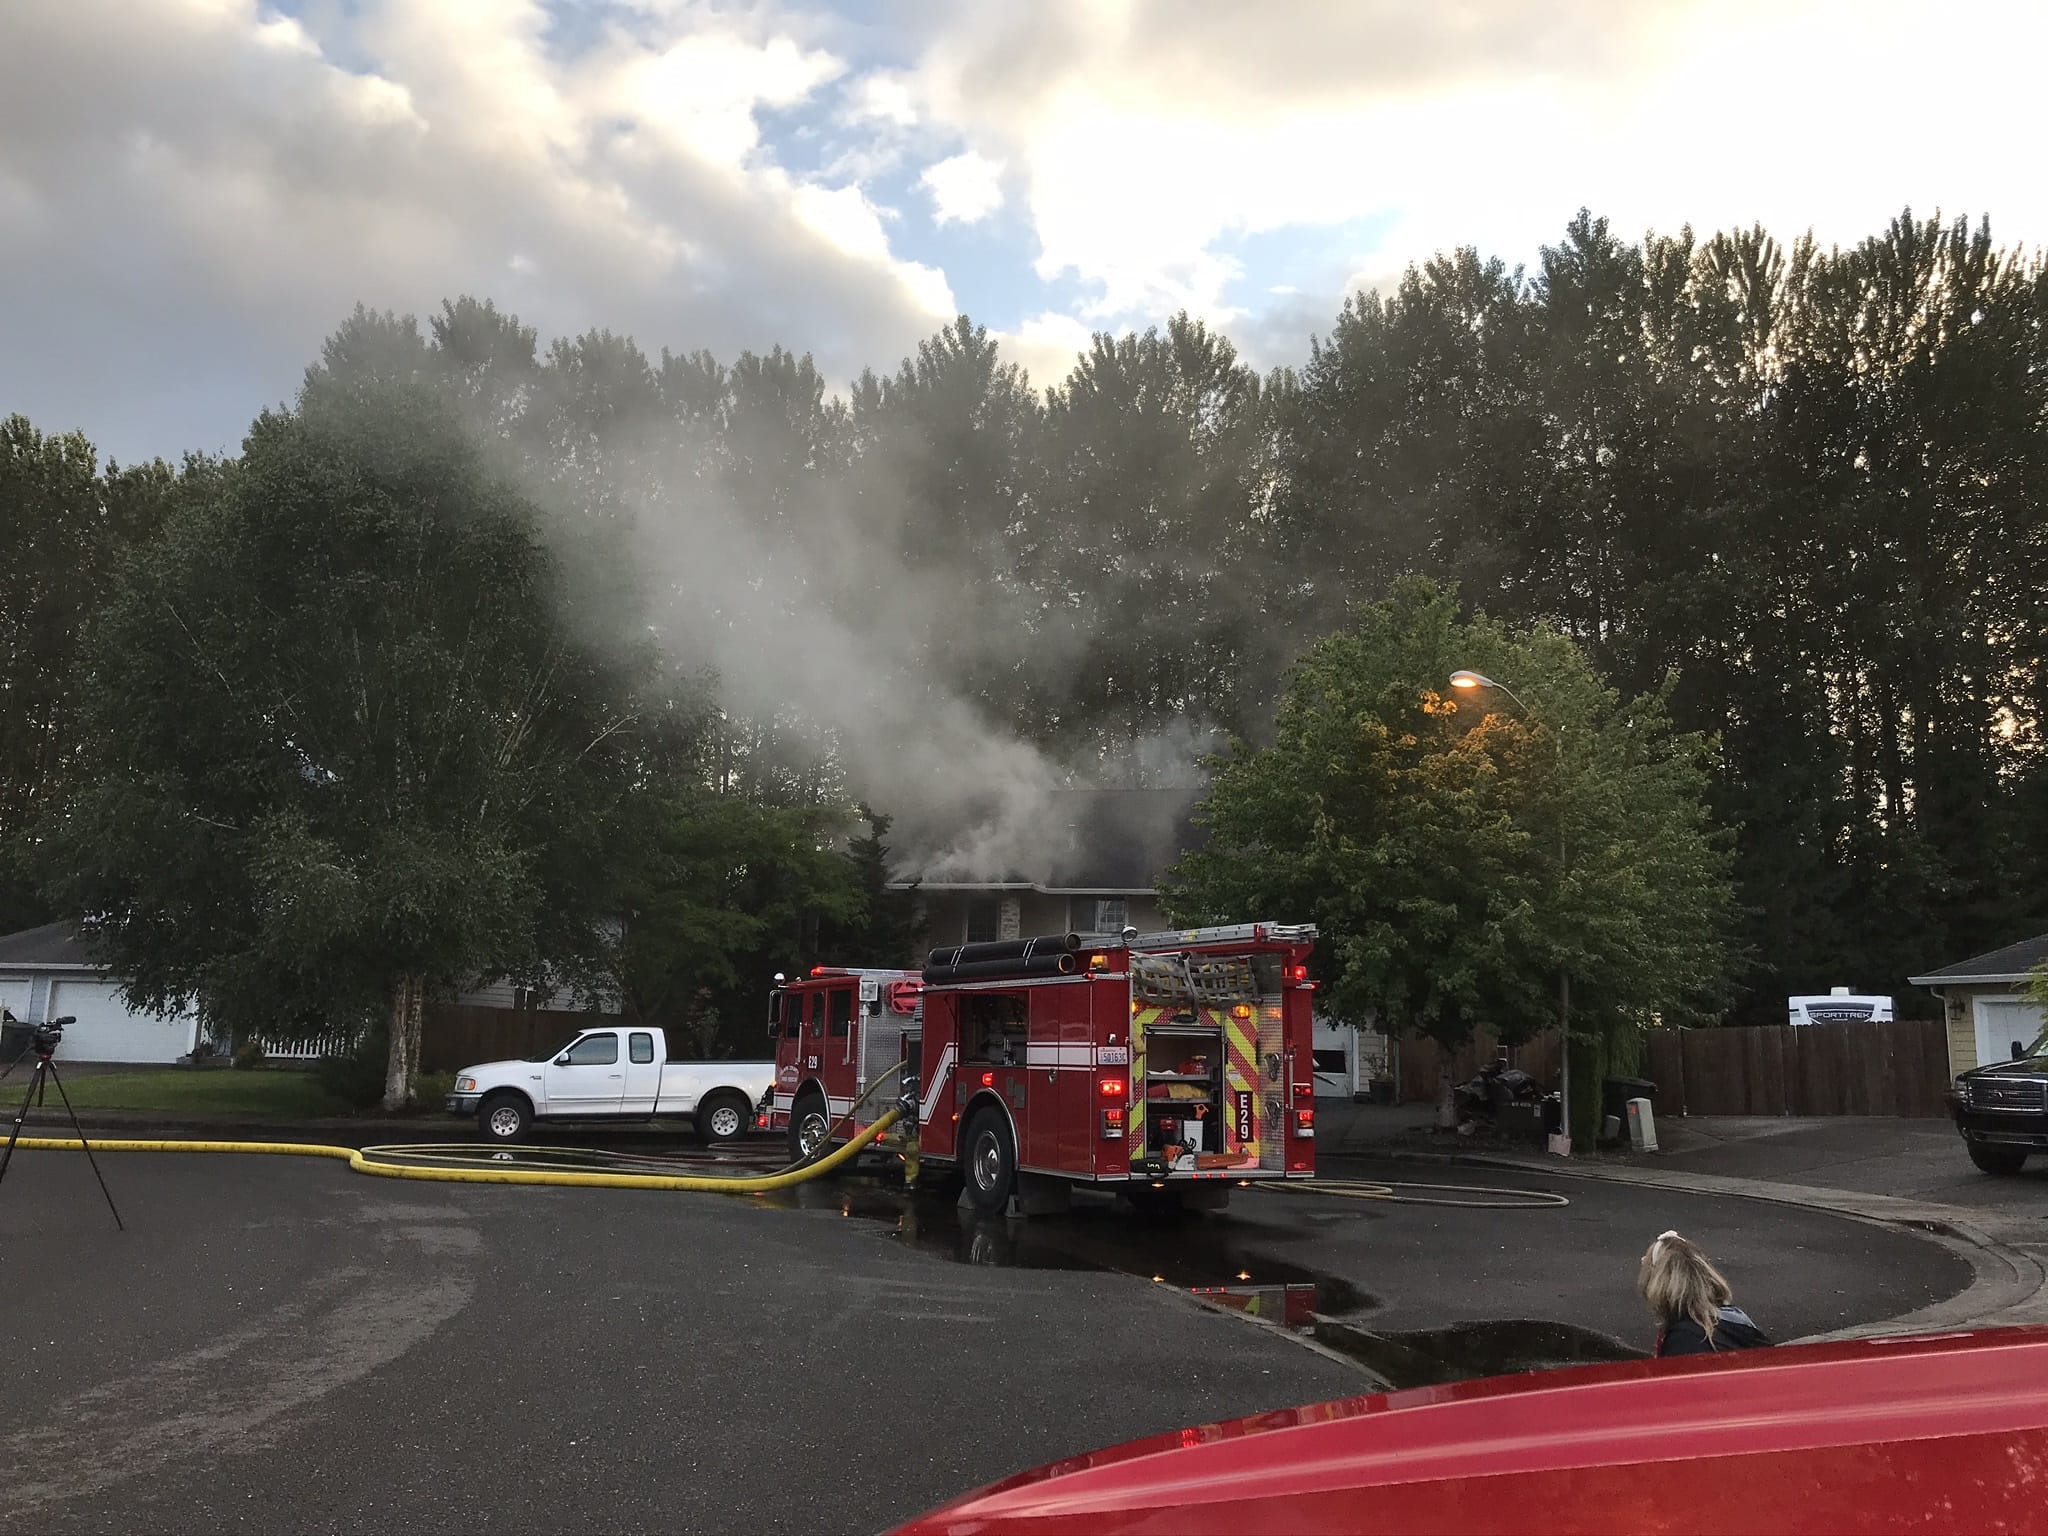 Clark County Fire & Rescue crews were dispatched at 7:19 p.m. Sunday to a report of a fire in the garage of a home at 169 Marty Loop. A dog was saved during the response.